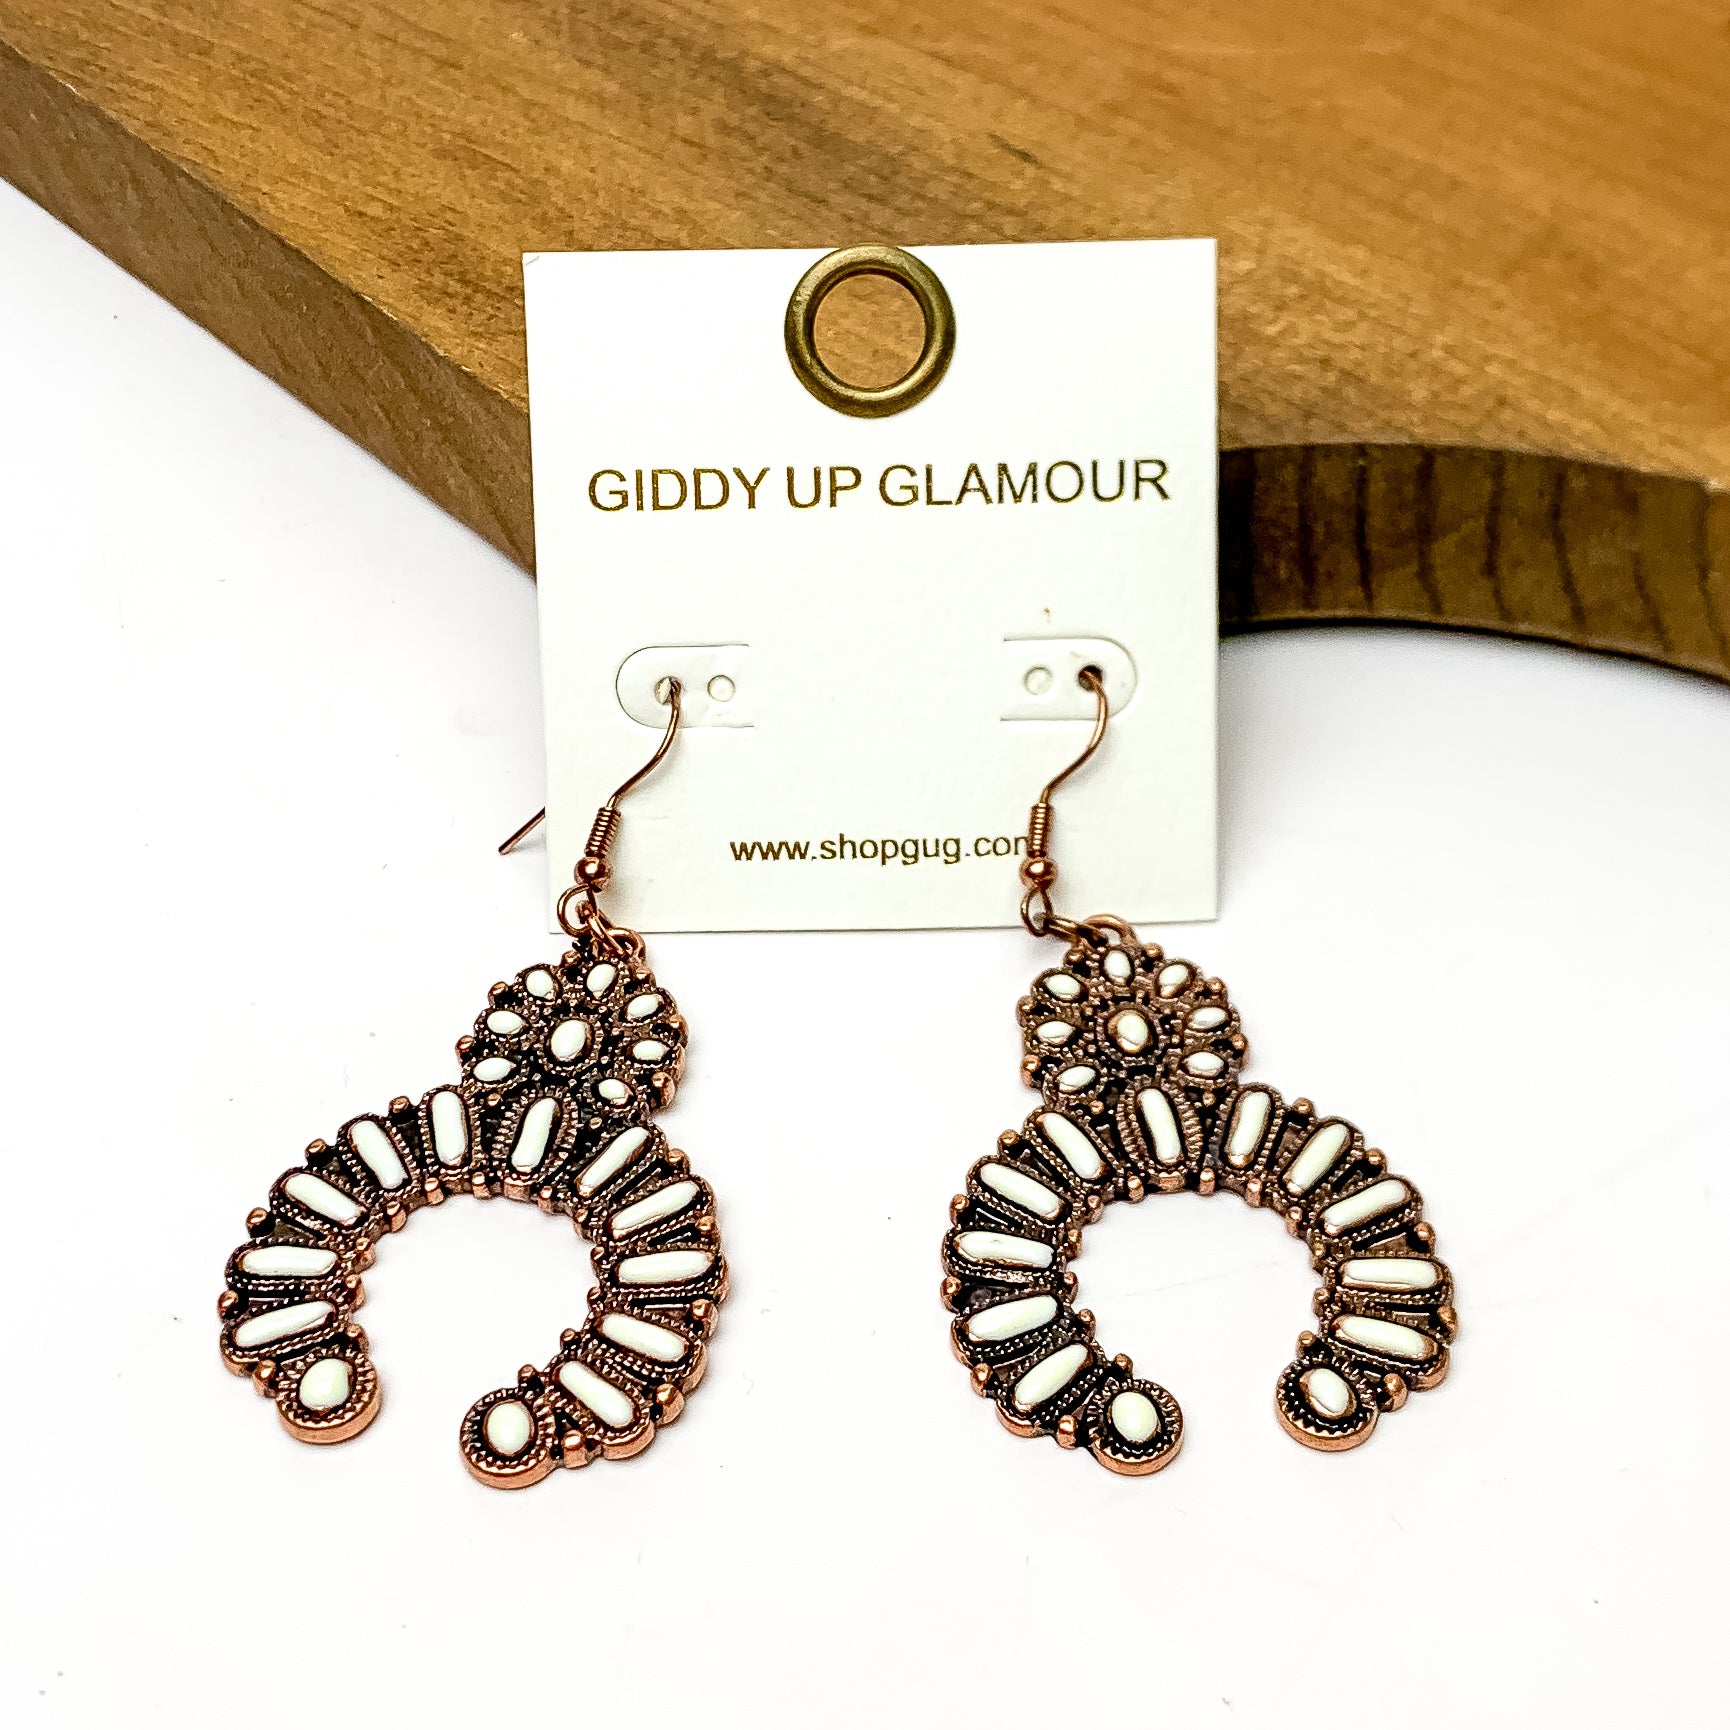 Squash Blossom Copper Tone Medium Earrings in Ivory. These earrings are pictured on a white background and are laying against a wood piece.